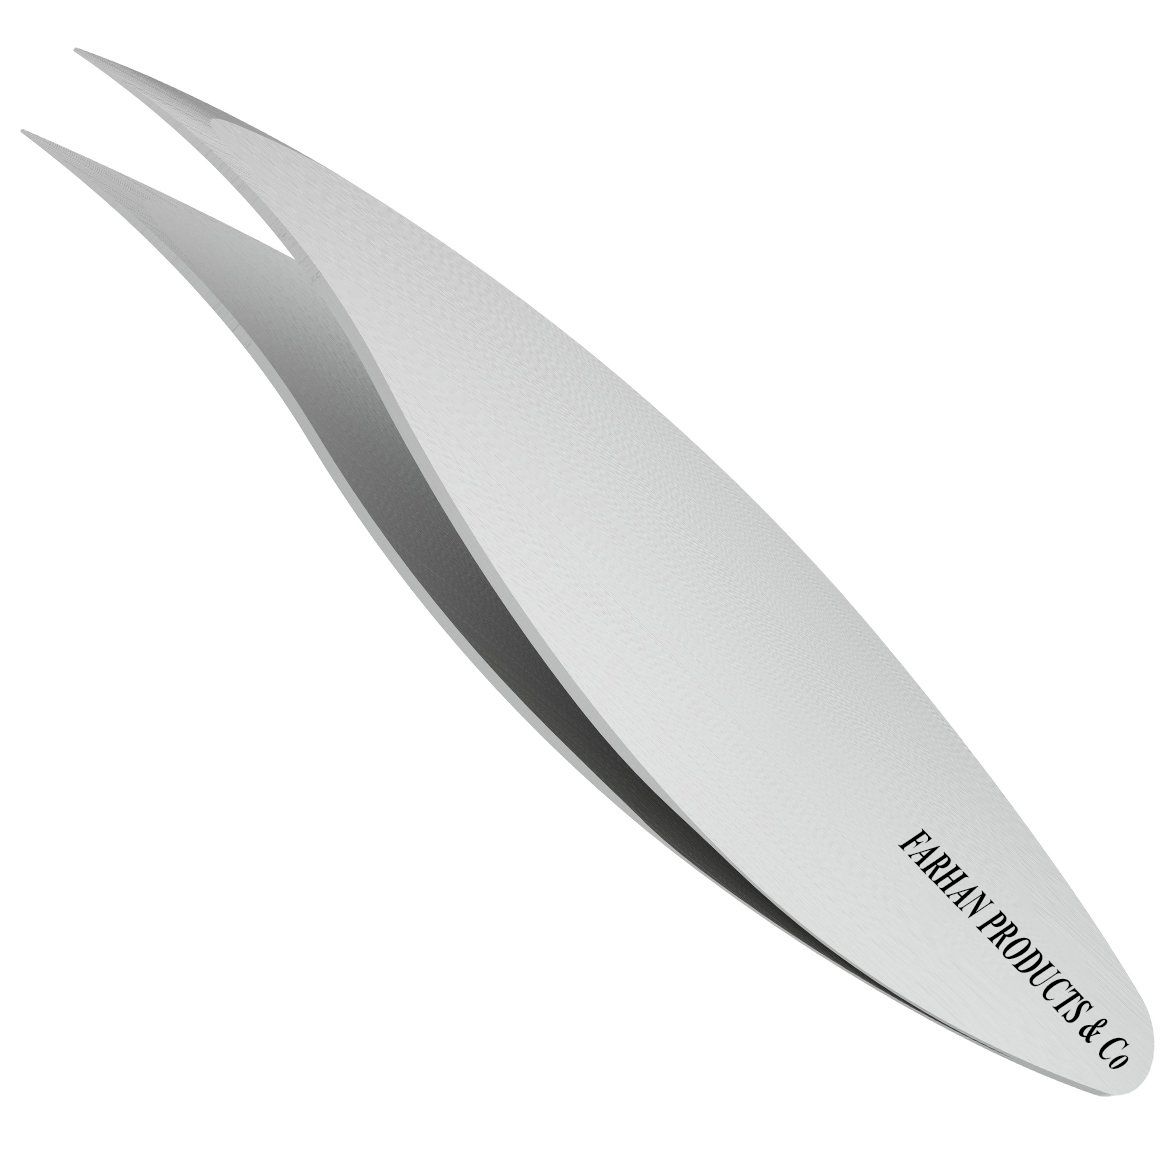 Combo Tip Tweezers Slanted & Pointed Extra Wide Grip for Fine Hair & Eyebrow Design Stainless Steel